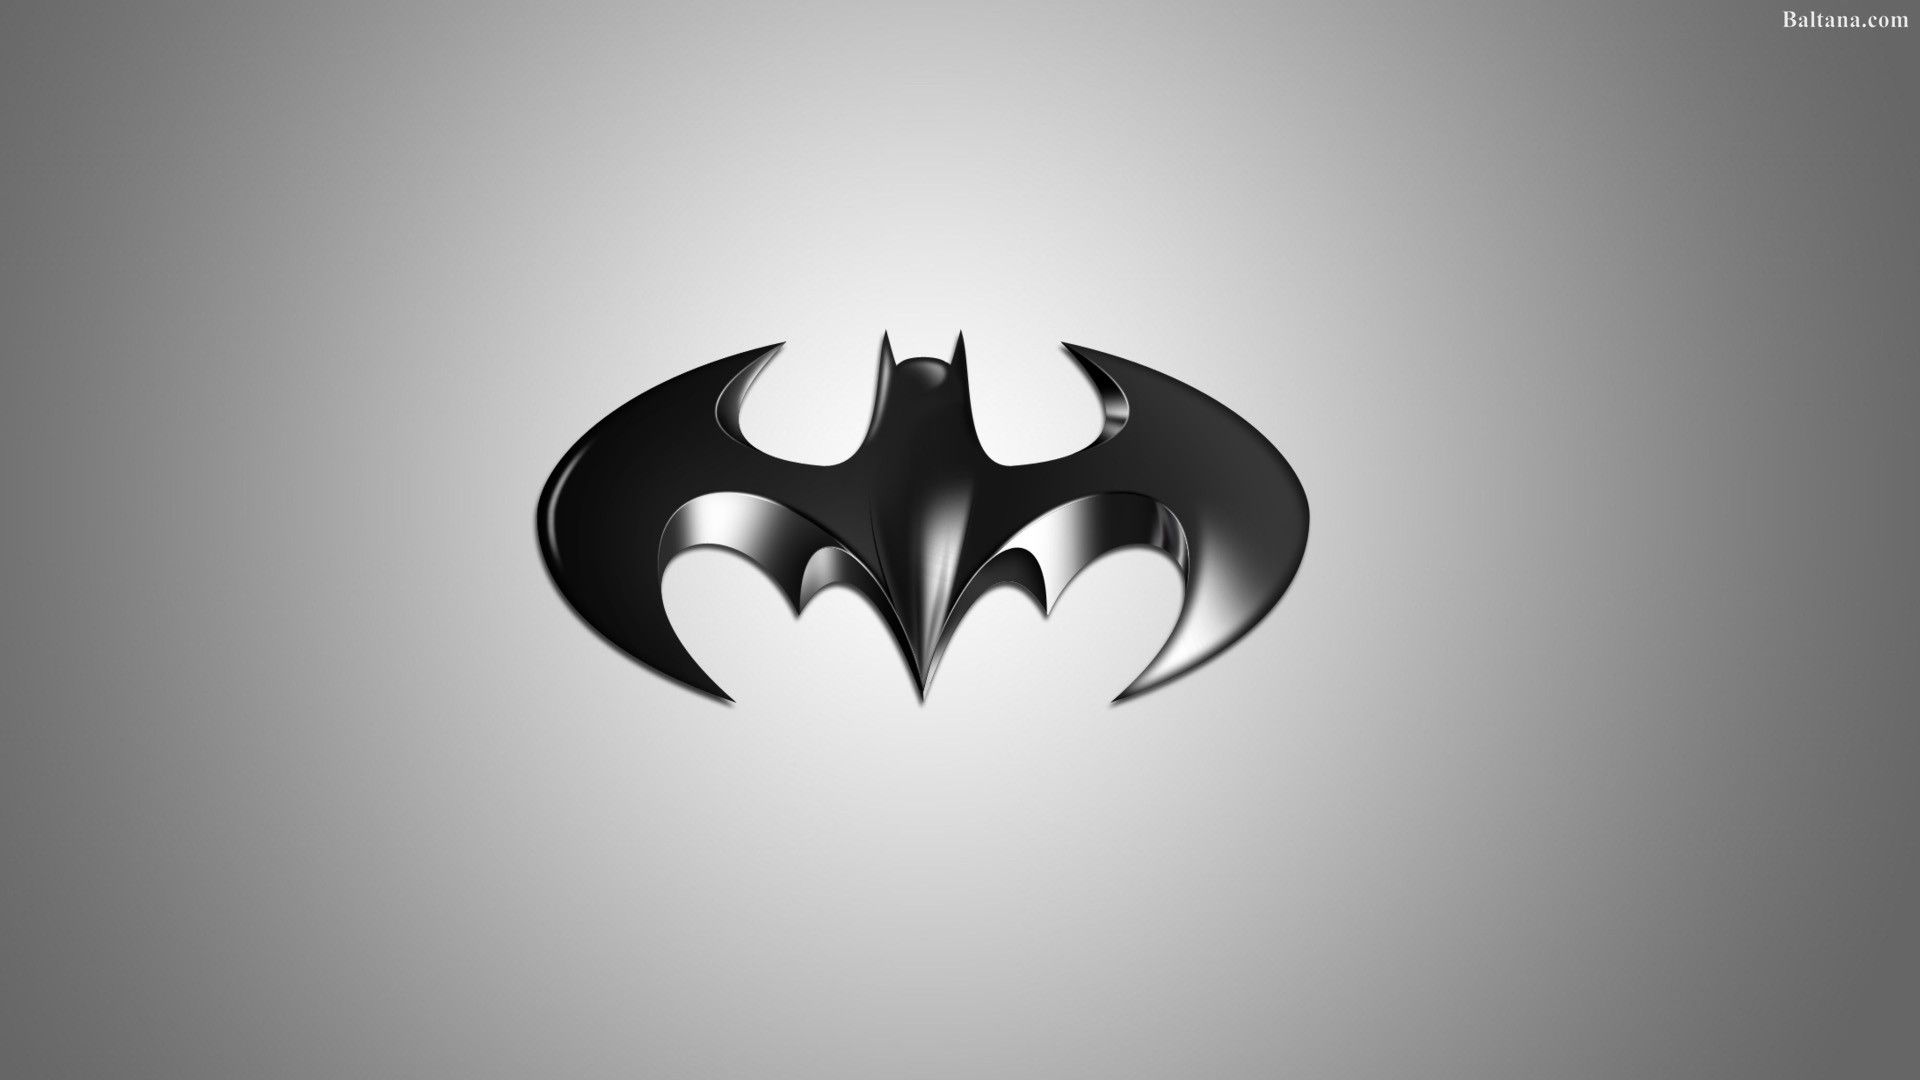 The batman logo with reflection  black and red 4K wallpaper download